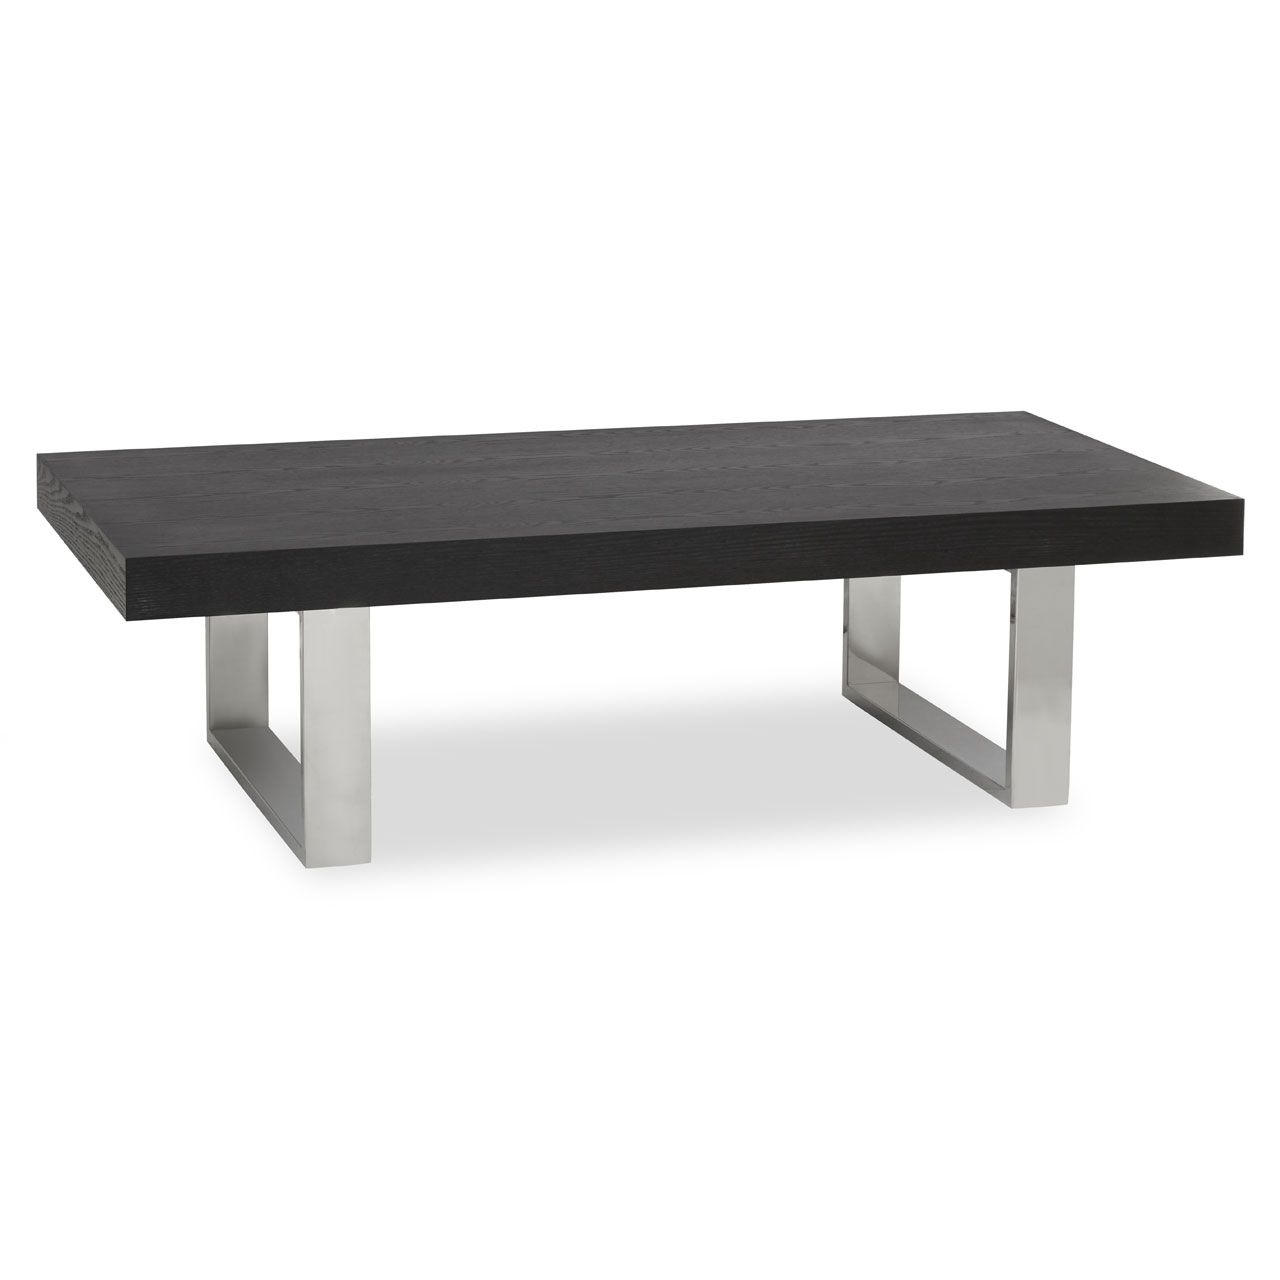 Ulmus Wooden Coffee Table In Black With Stainless Steel Base